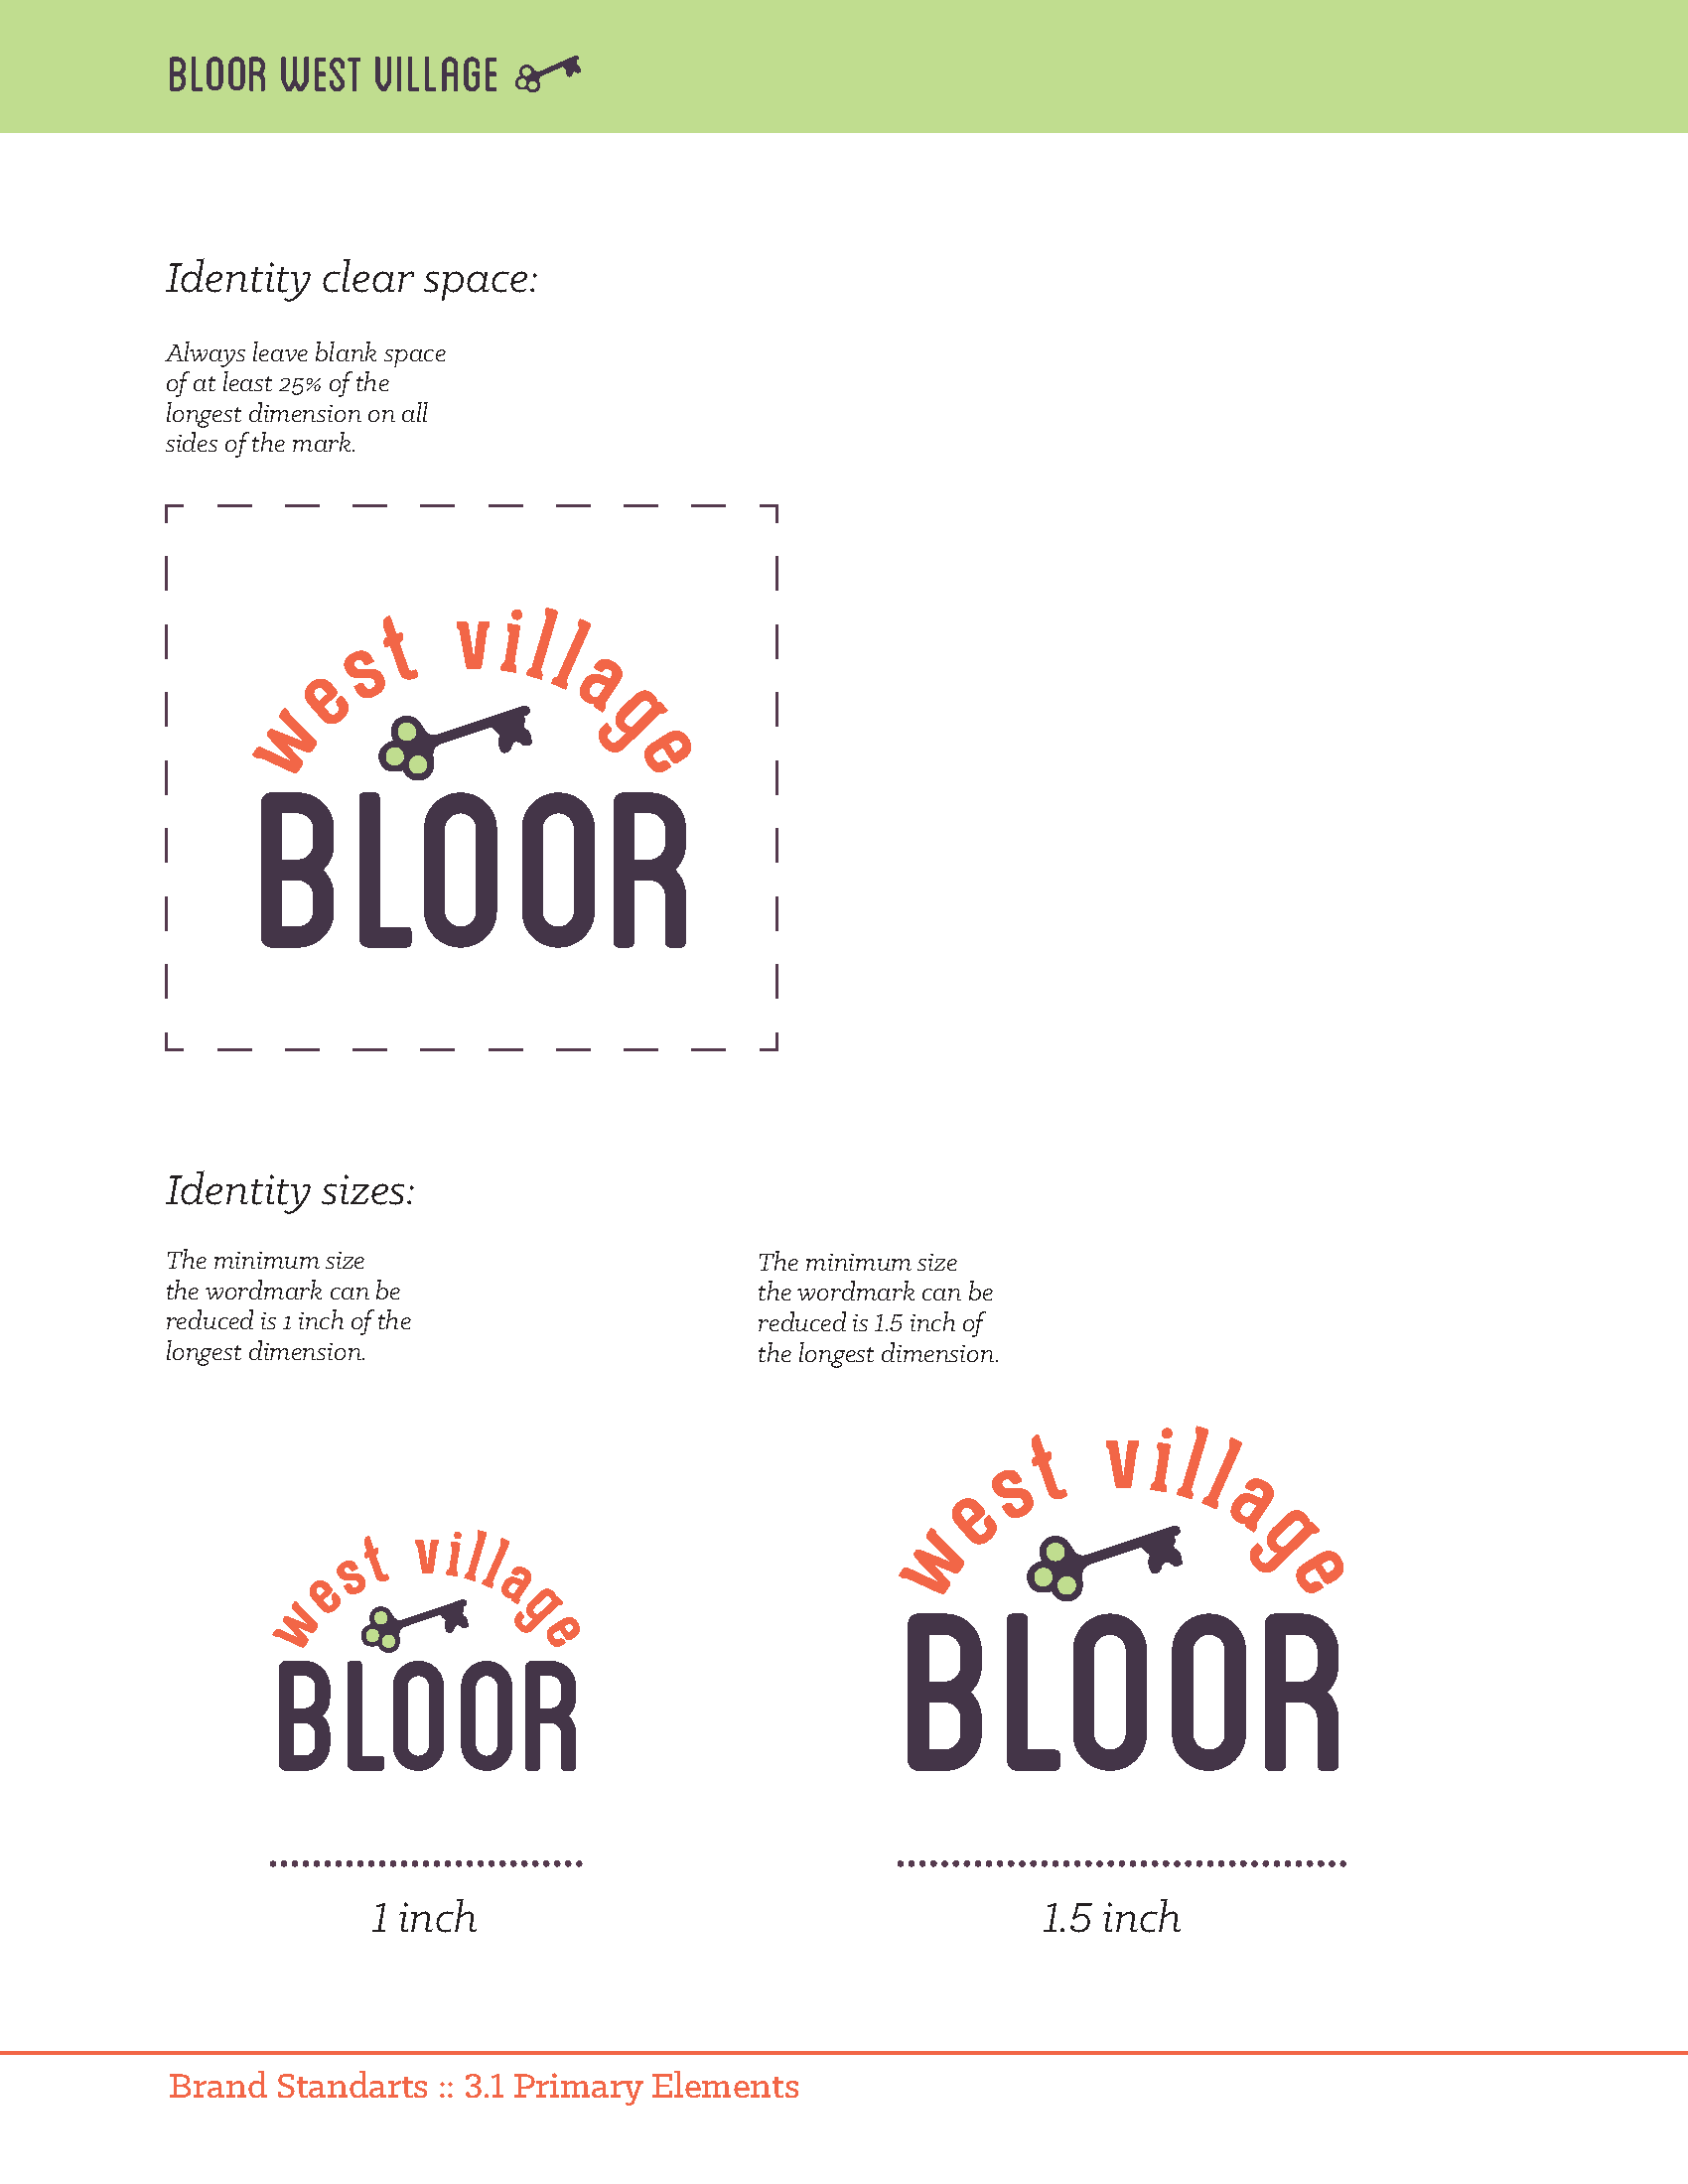 Telenso_N_Bloor_Manual_Page_08.png